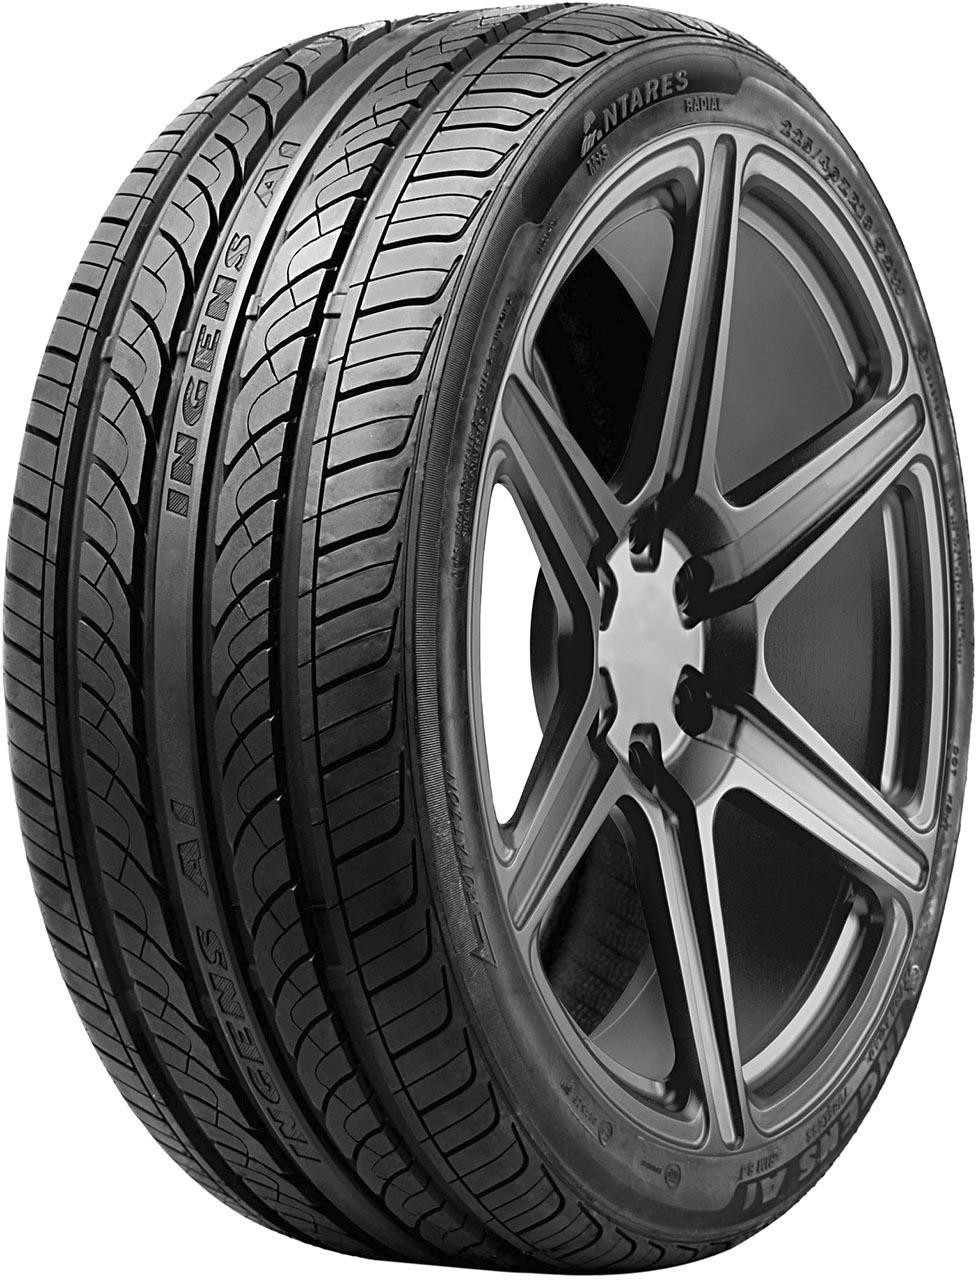 Antares Tires Ingens A1 255/45 R19 104W XL